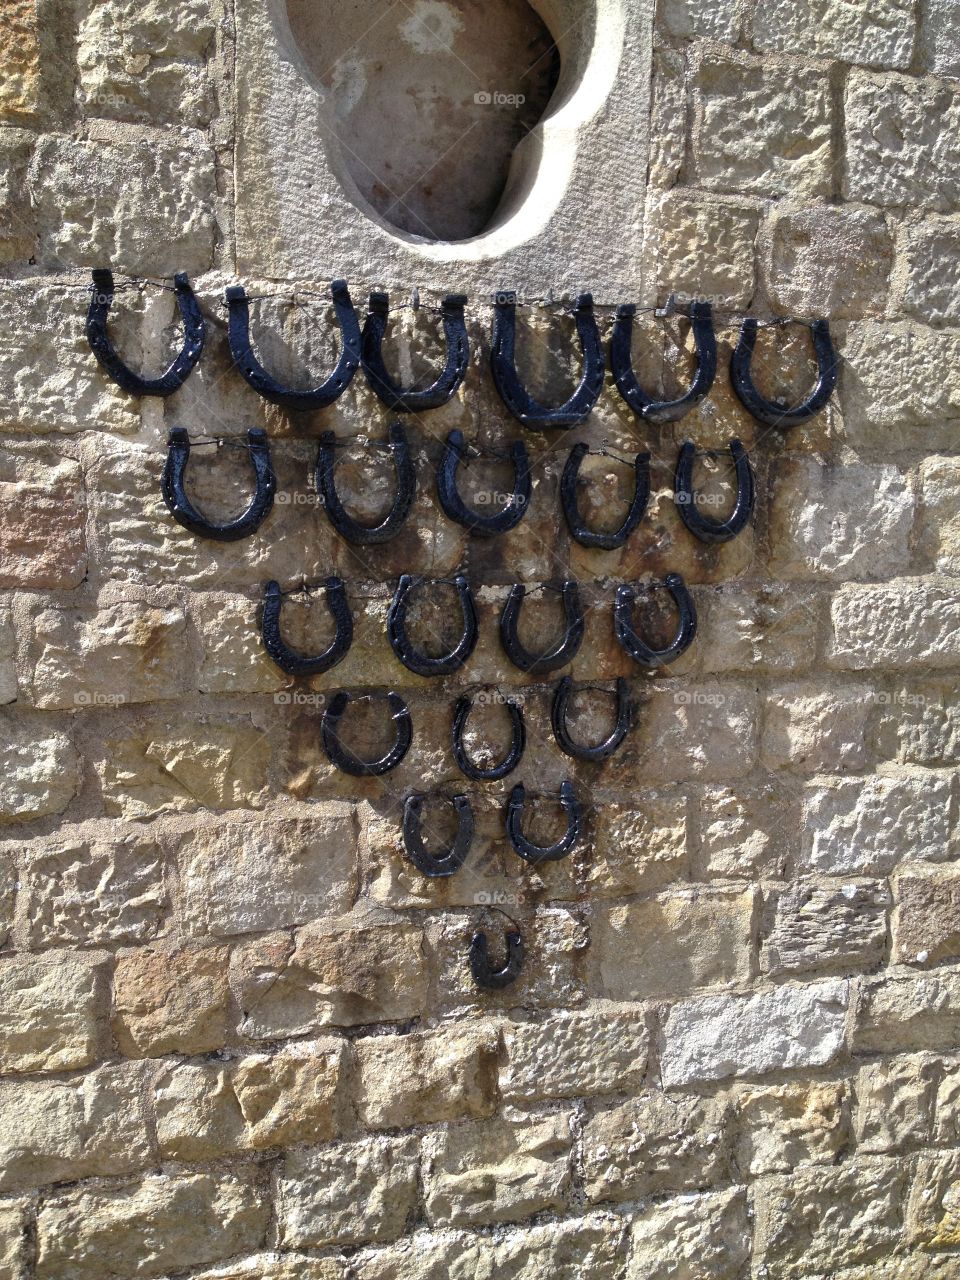 Lucky Wall. A very lucky wall with all the horseshoes 